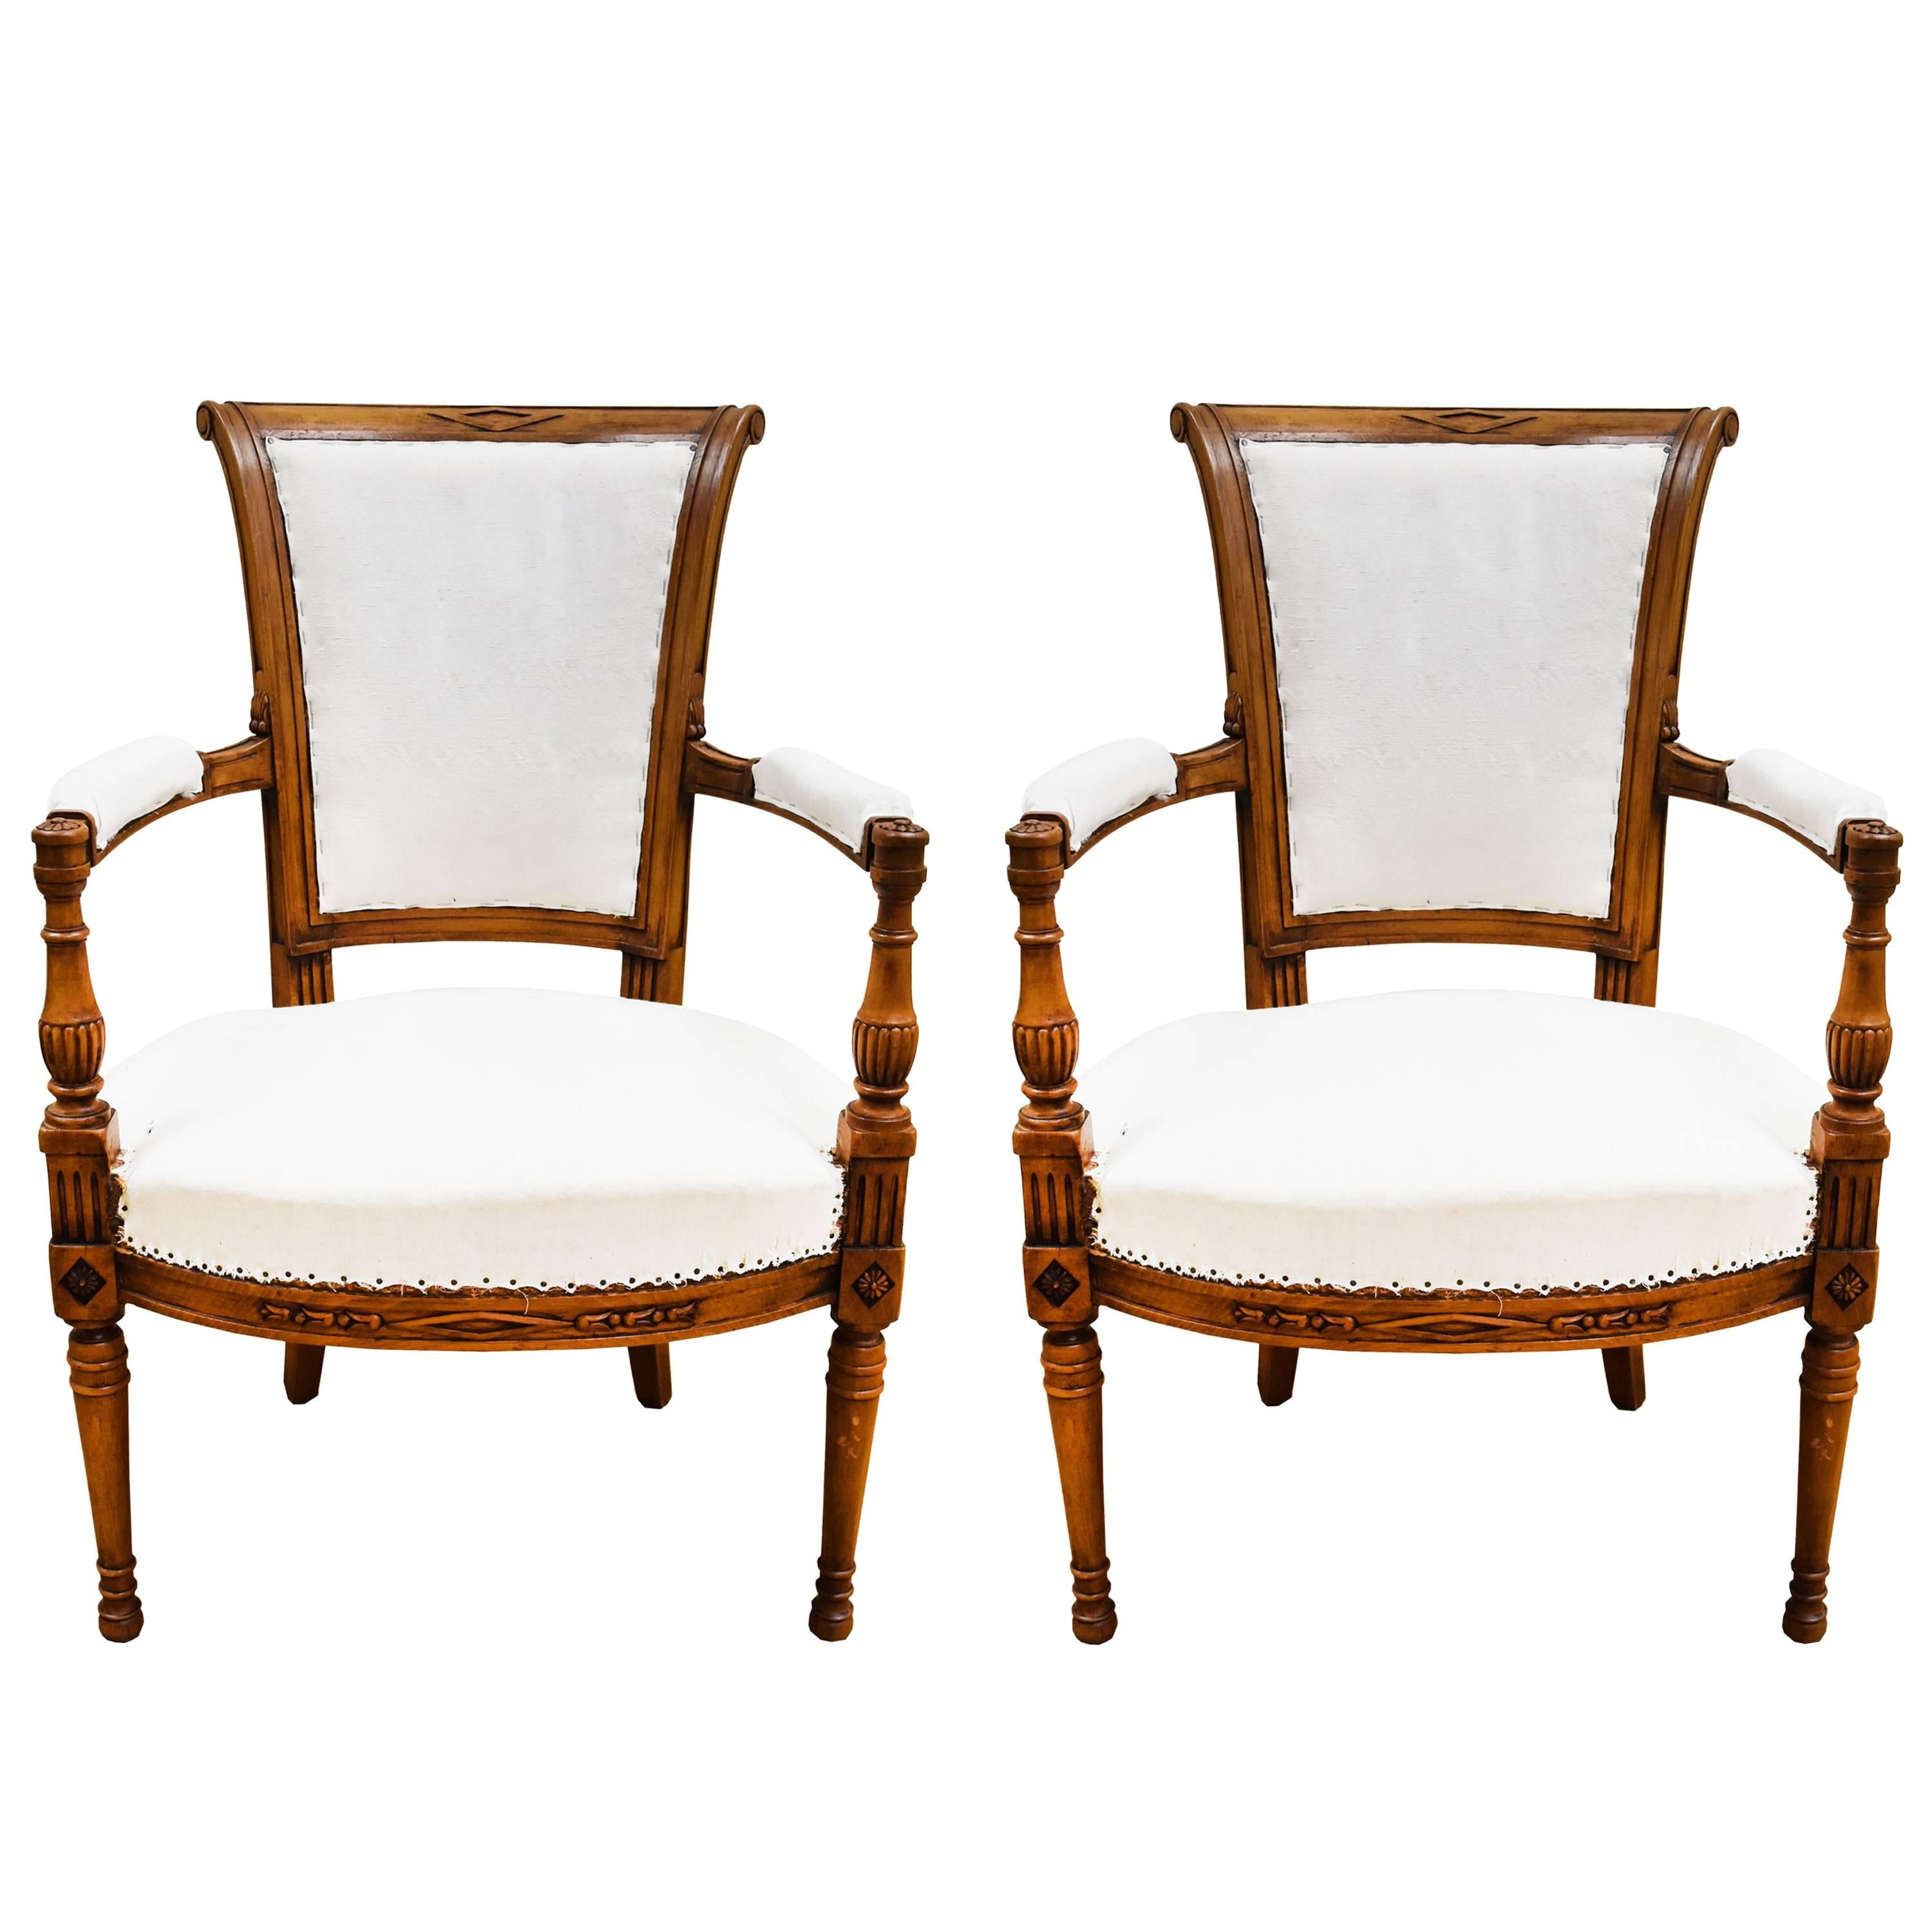 Pair of Late 19th Century French Directoire Style Armchairs